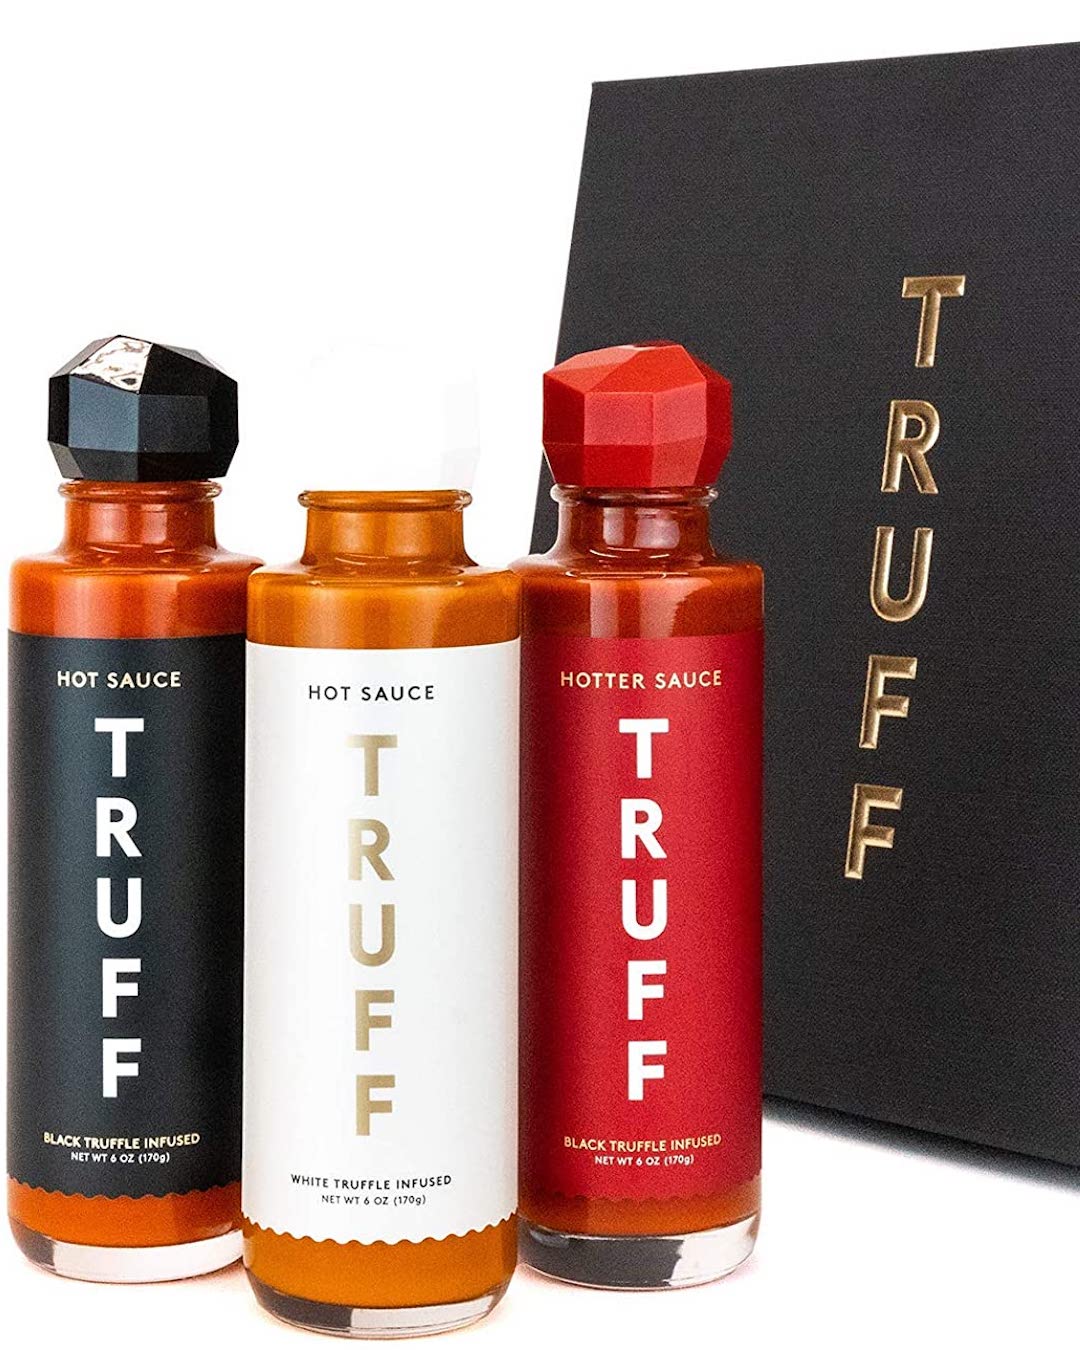 TRUFF hot sauce Father's Day gift idea